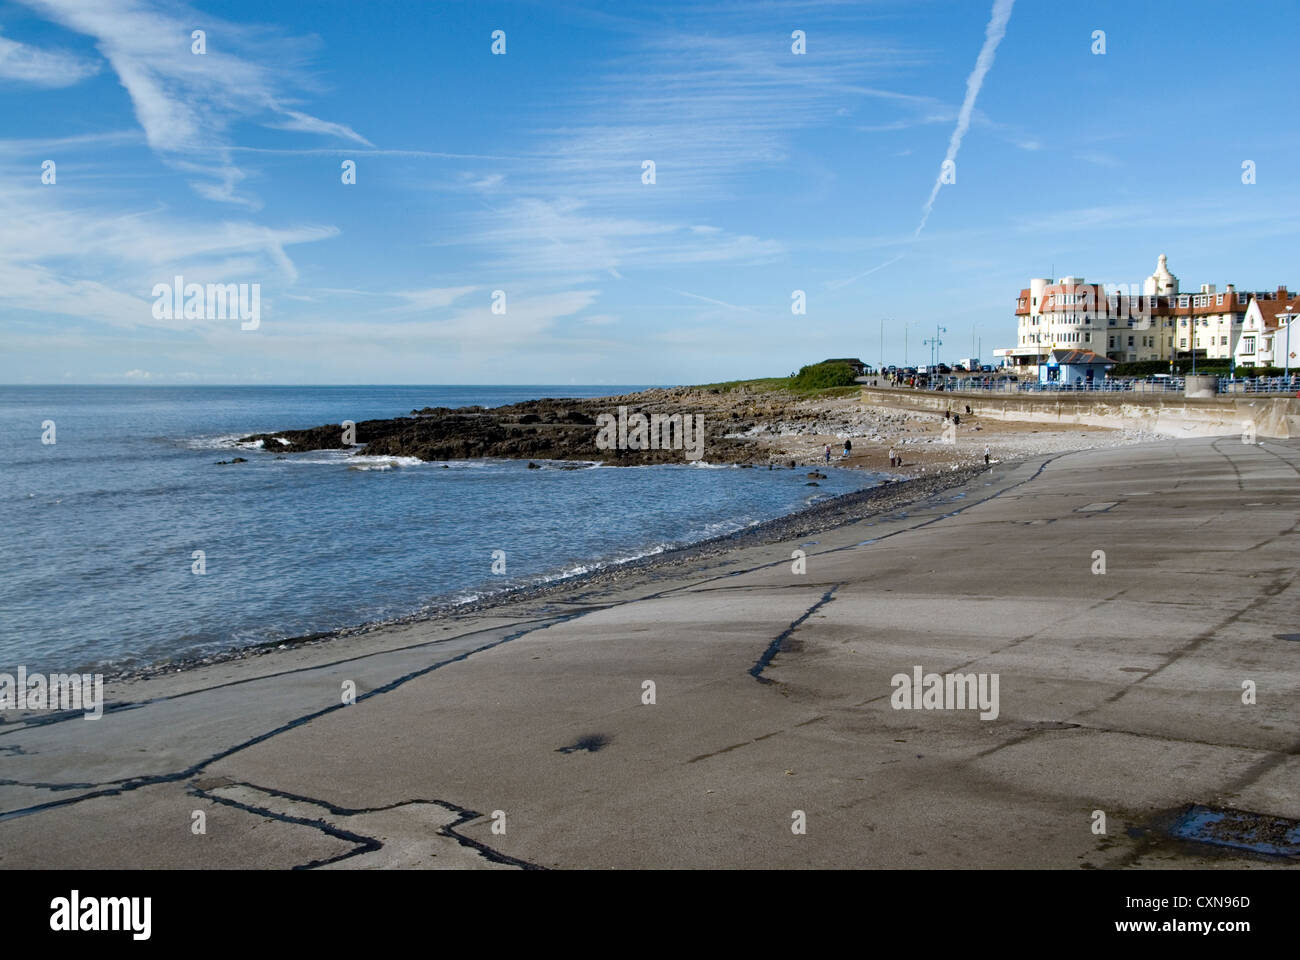 seafront or town or tarmac beach porthcawl wales uk Stock Photo